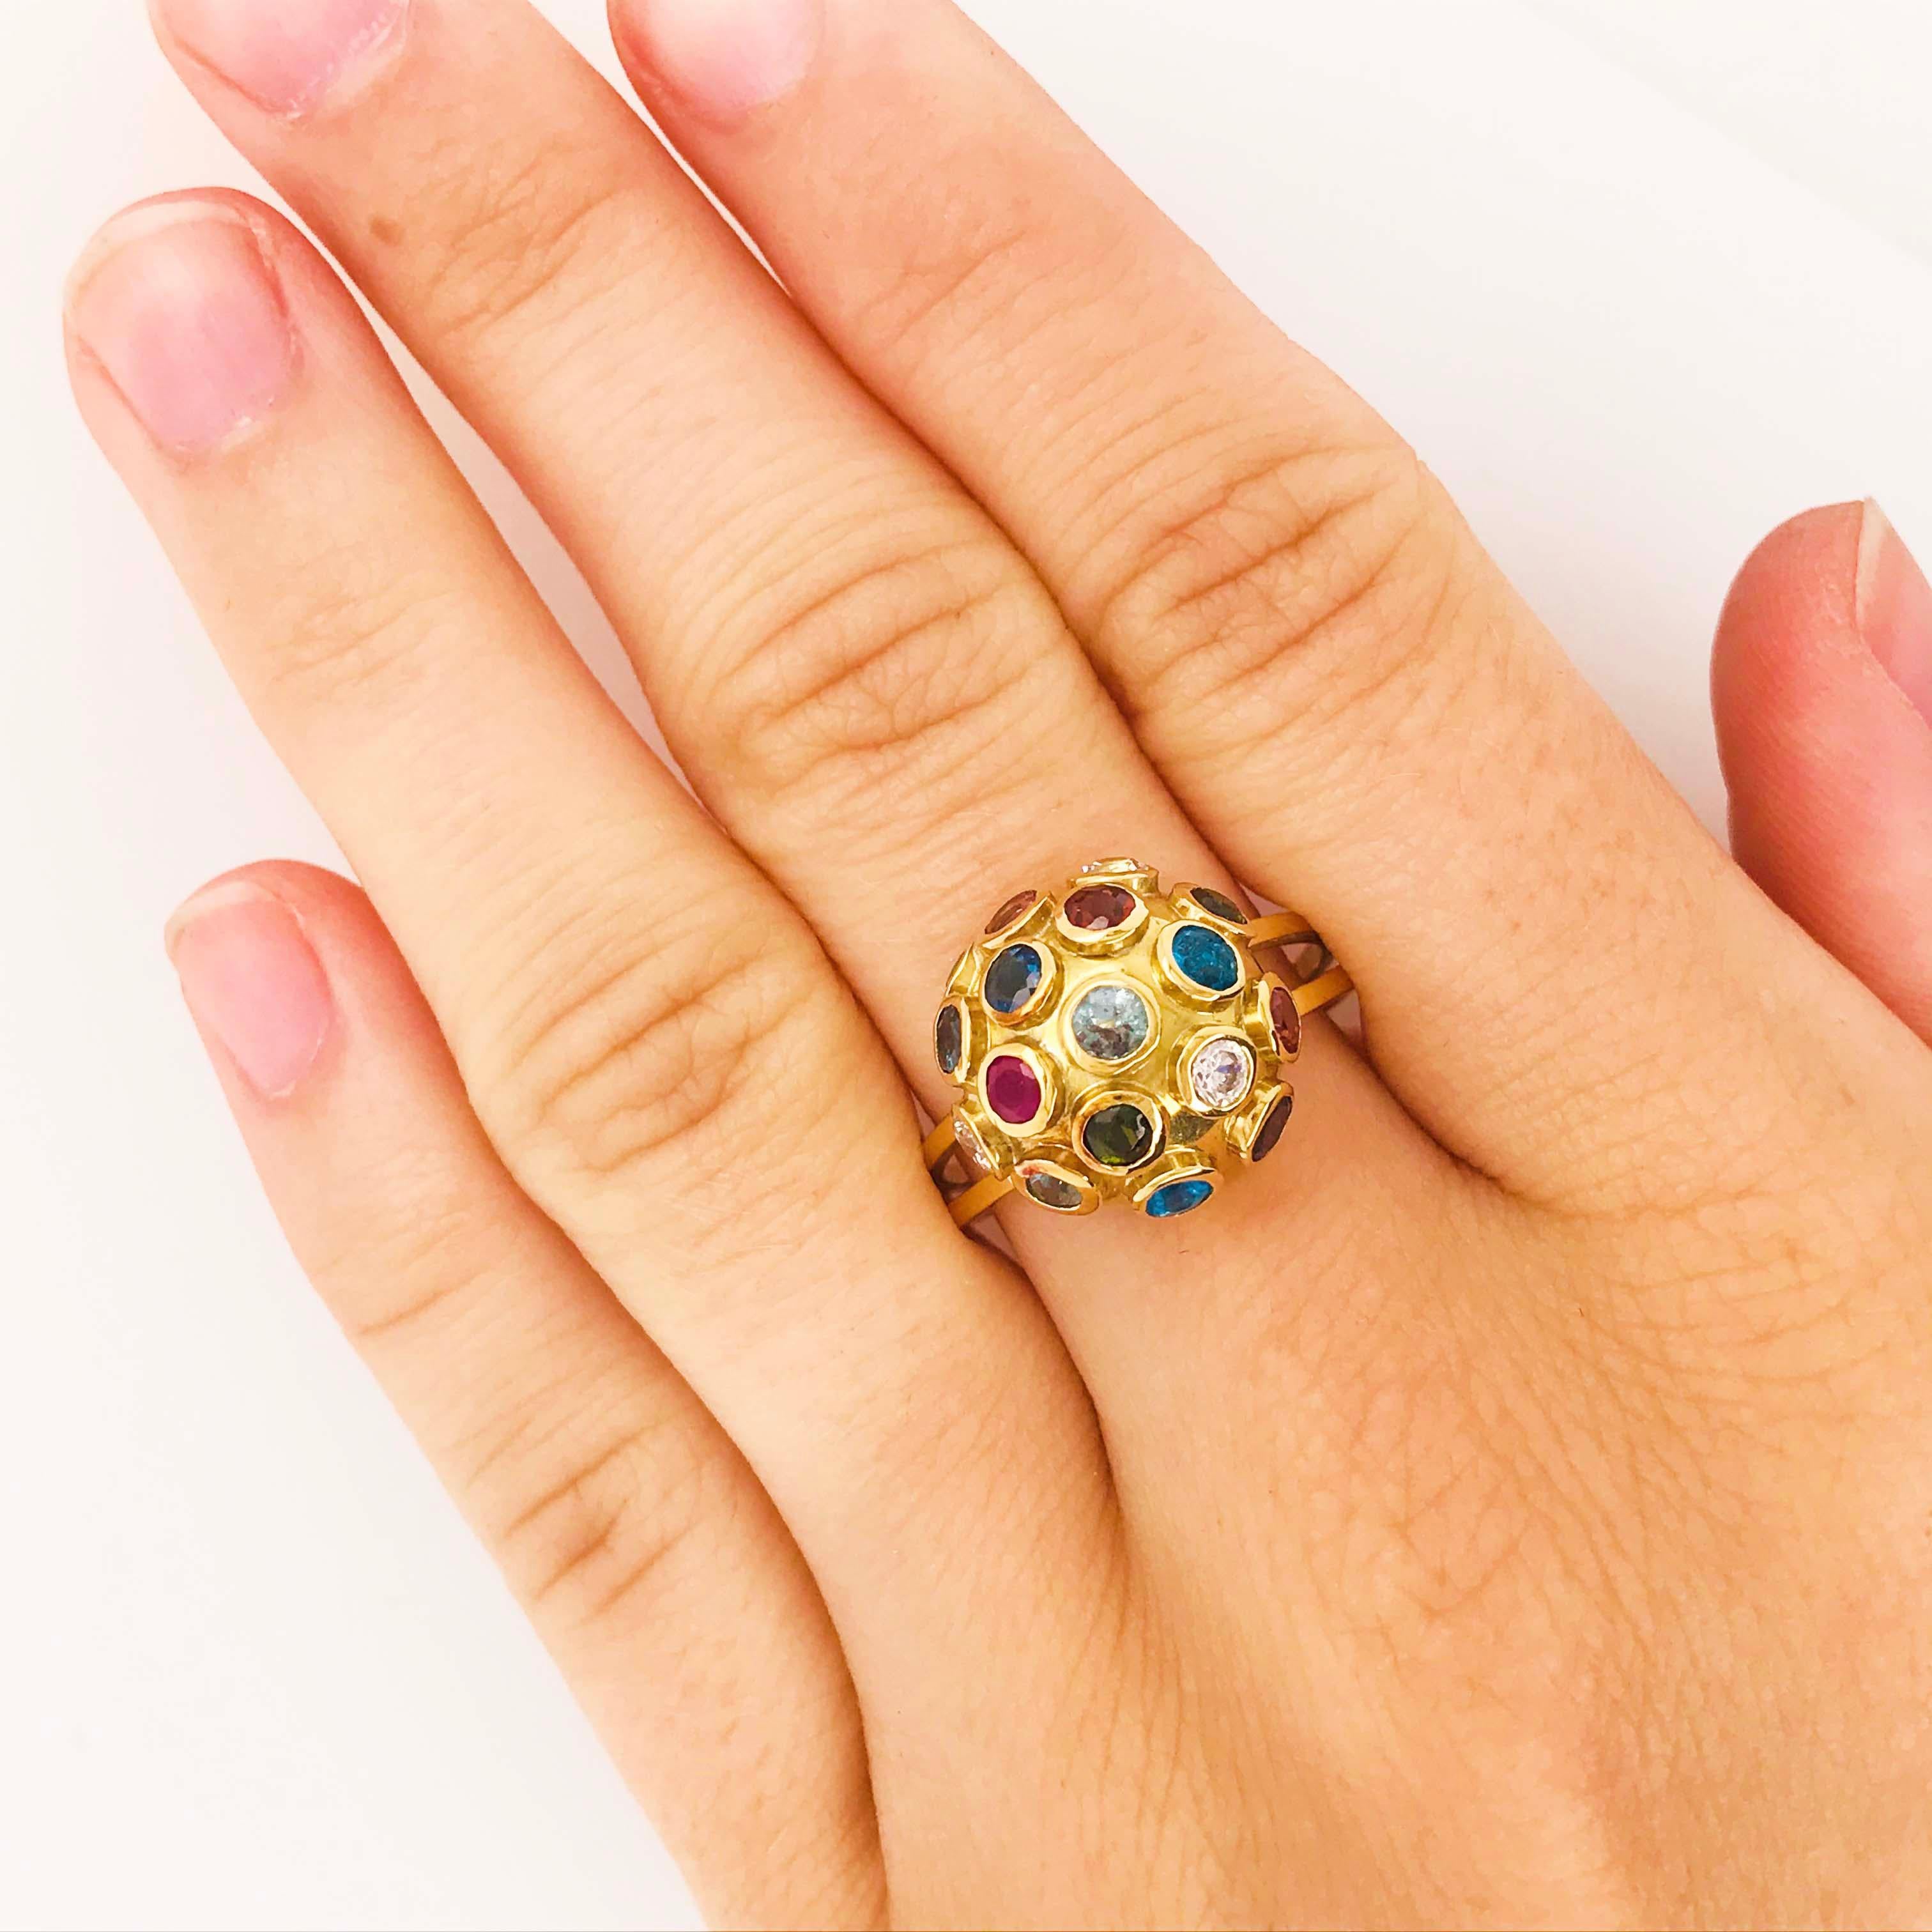 The genuine precious gemstone ring is a beautiful fine jewelry piece. Made with 18 karat yellow gold and genuine gemstones! The 18k gold have a rich yellow color that contrasts with the natural gemstone colors perfectly. The ring has a split shank